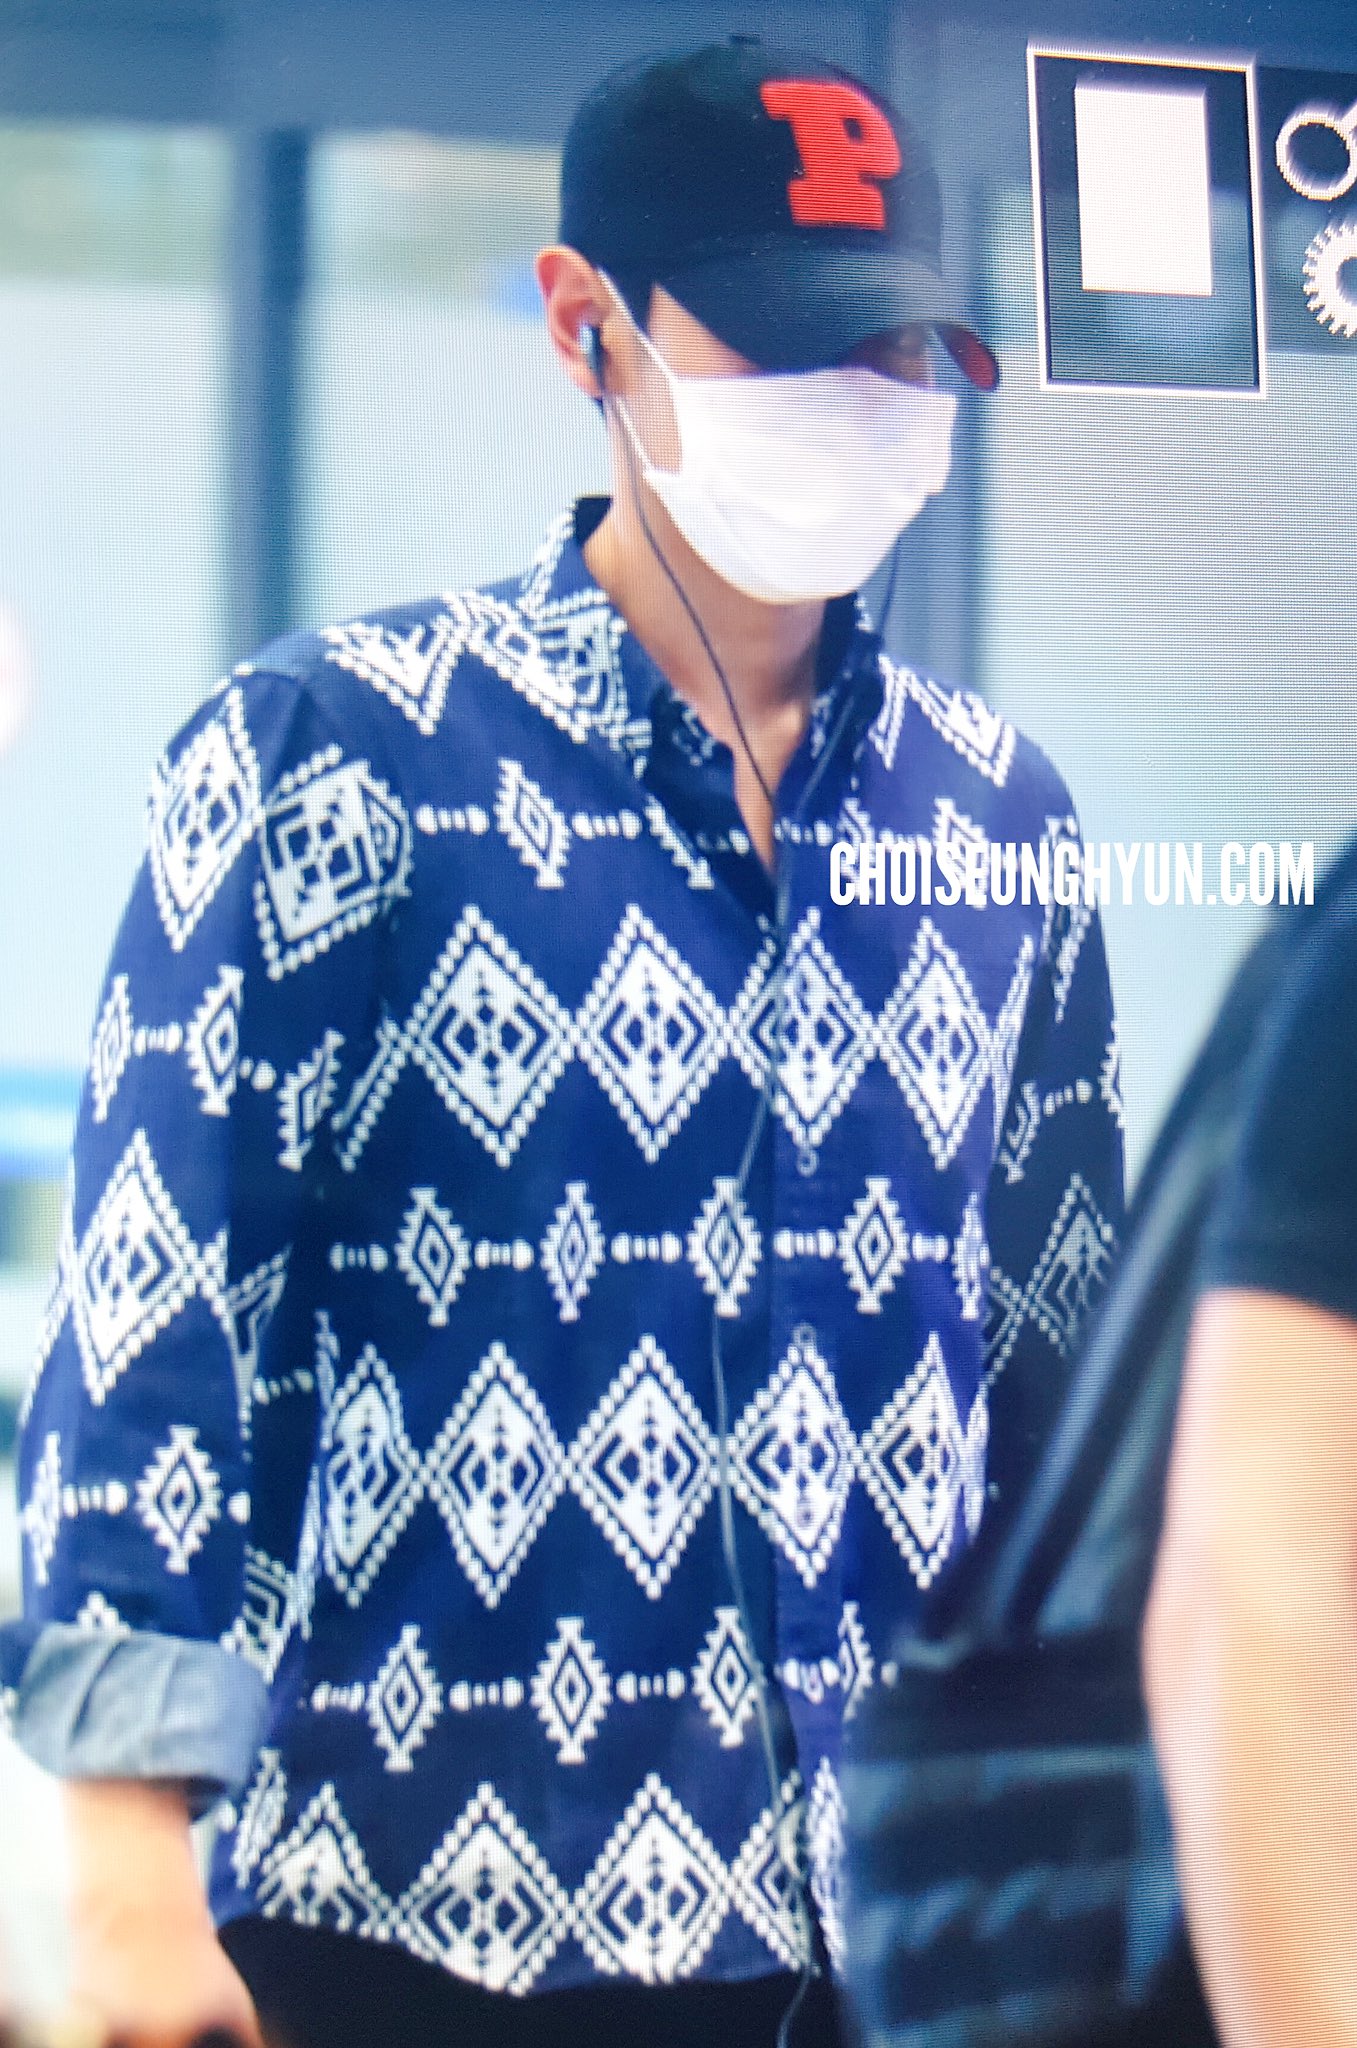 TOP Arrival Seoul ICN From Shanghai 2016-06-16 (1)